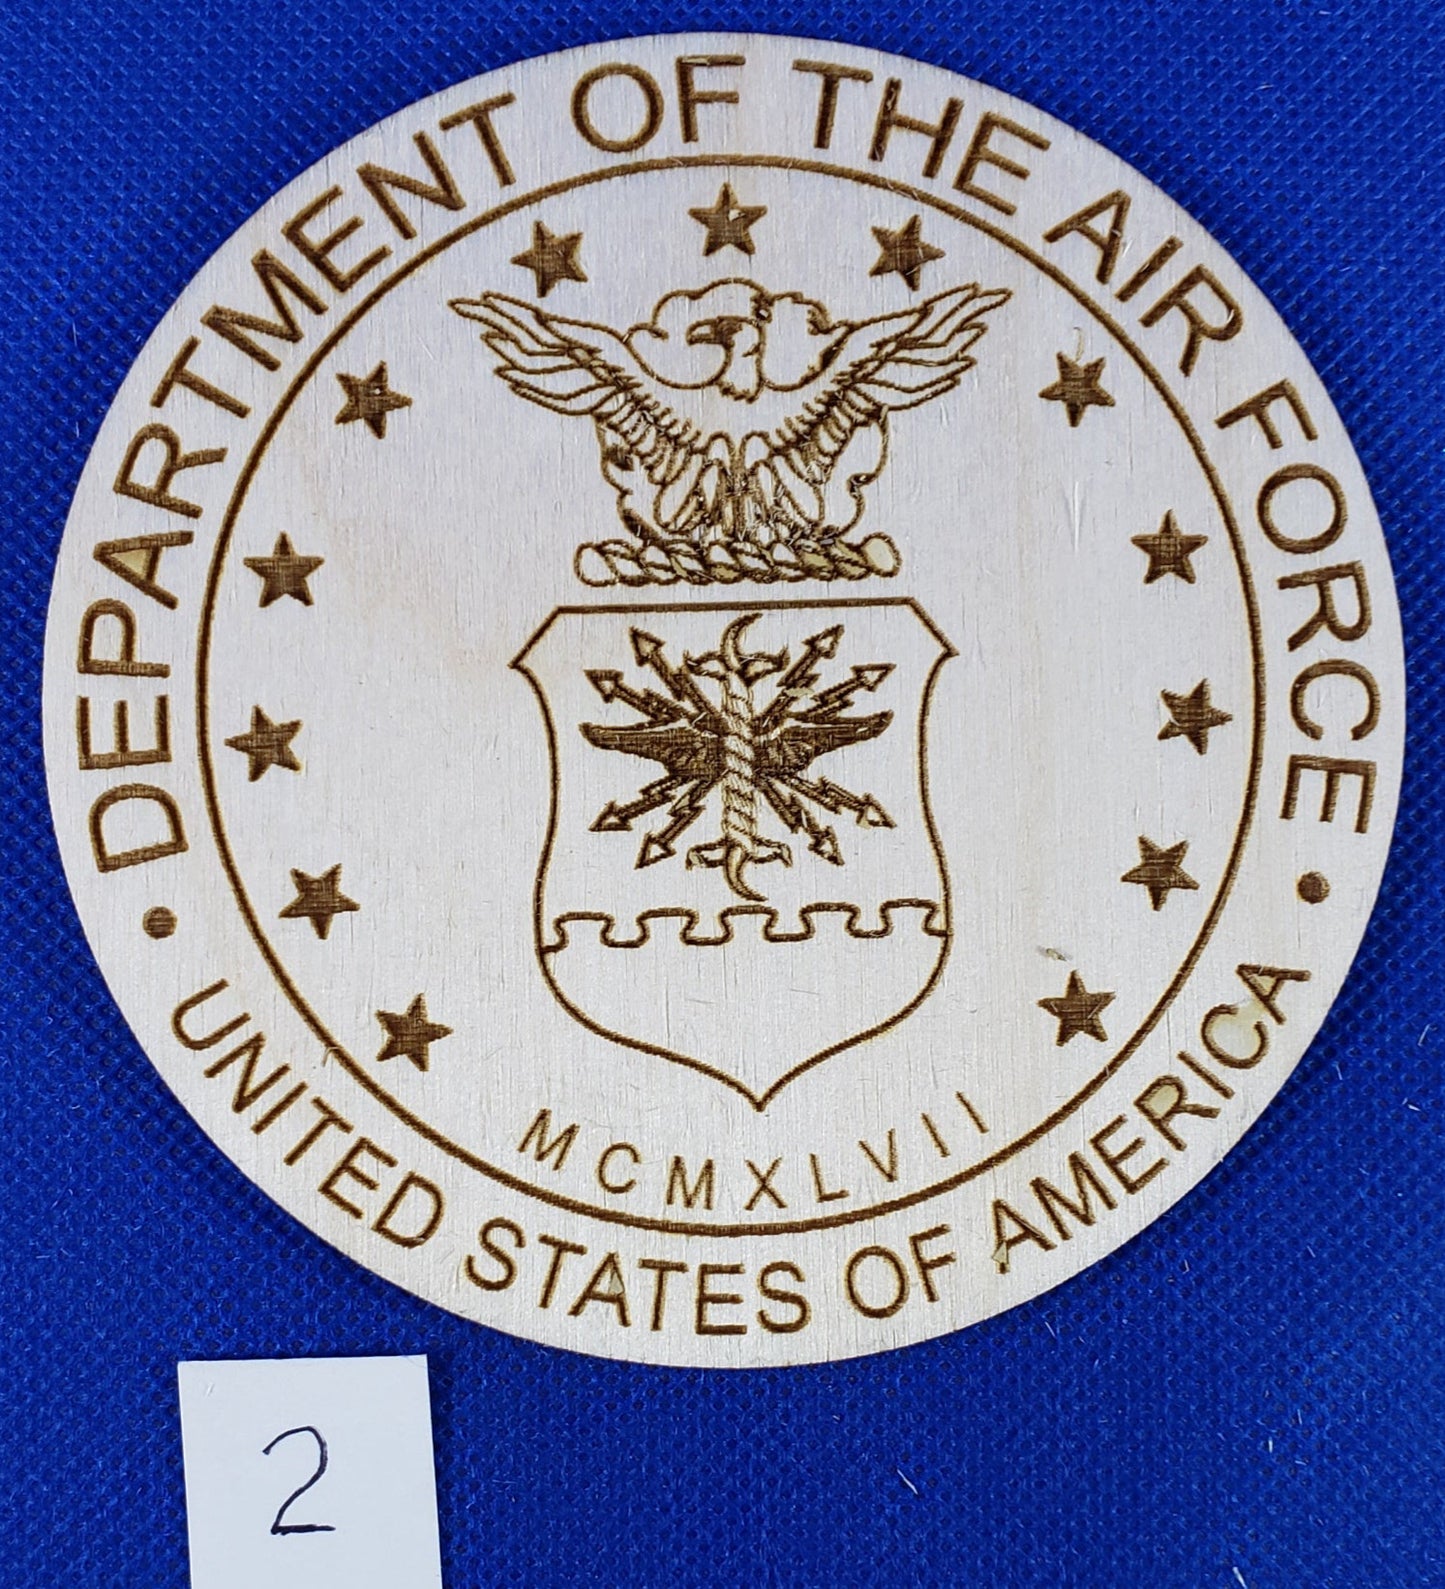 Department of the Air Force Engraved - Laser cut natural wooden blanks